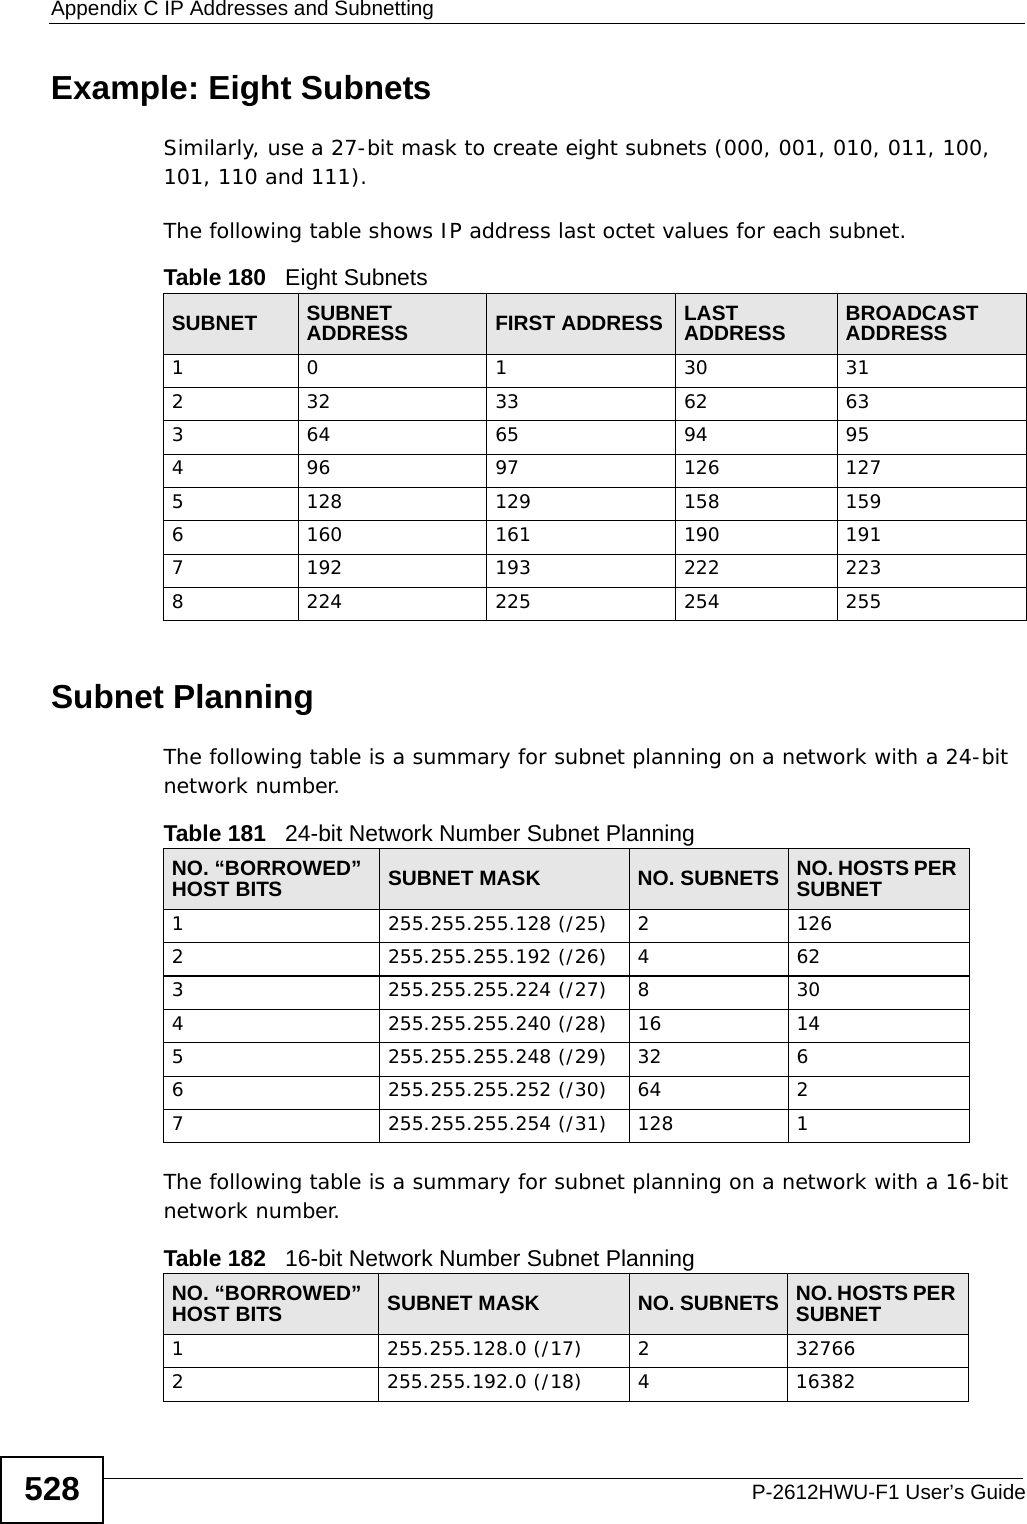 Appendix C IP Addresses and SubnettingP-2612HWU-F1 User’s Guide528Example: Eight SubnetsSimilarly, use a 27-bit mask to create eight subnets (000, 001, 010, 011, 100, 101, 110 and 111). The following table shows IP address last octet values for each subnet.Subnet PlanningThe following table is a summary for subnet planning on a network with a 24-bit network number.The following table is a summary for subnet planning on a network with a 16-bit network number. Table 180   Eight SubnetsSUBNET SUBNET ADDRESS FIRST ADDRESS LAST ADDRESS BROADCAST ADDRESS1 0 1 30 31232 33 62 63364 65 94 95496 97 126 1275128 129 158 1596160 161 190 1917192 193 222 2238224 225 254 255Table 181   24-bit Network Number Subnet PlanningNO. “BORROWED” HOST BITS SUBNET MASK NO. SUBNETS NO. HOSTS PER SUBNET1255.255.255.128 (/25) 21262255.255.255.192 (/26) 4623255.255.255.224 (/27) 8304255.255.255.240 (/28) 16 145255.255.255.248 (/29) 32 66255.255.255.252 (/30) 64 27255.255.255.254 (/31) 128 1Table 182   16-bit Network Number Subnet PlanningNO. “BORROWED” HOST BITS SUBNET MASK NO. SUBNETS NO. HOSTS PER SUBNET1255.255.128.0 (/17) 2327662255.255.192.0 (/18) 416382